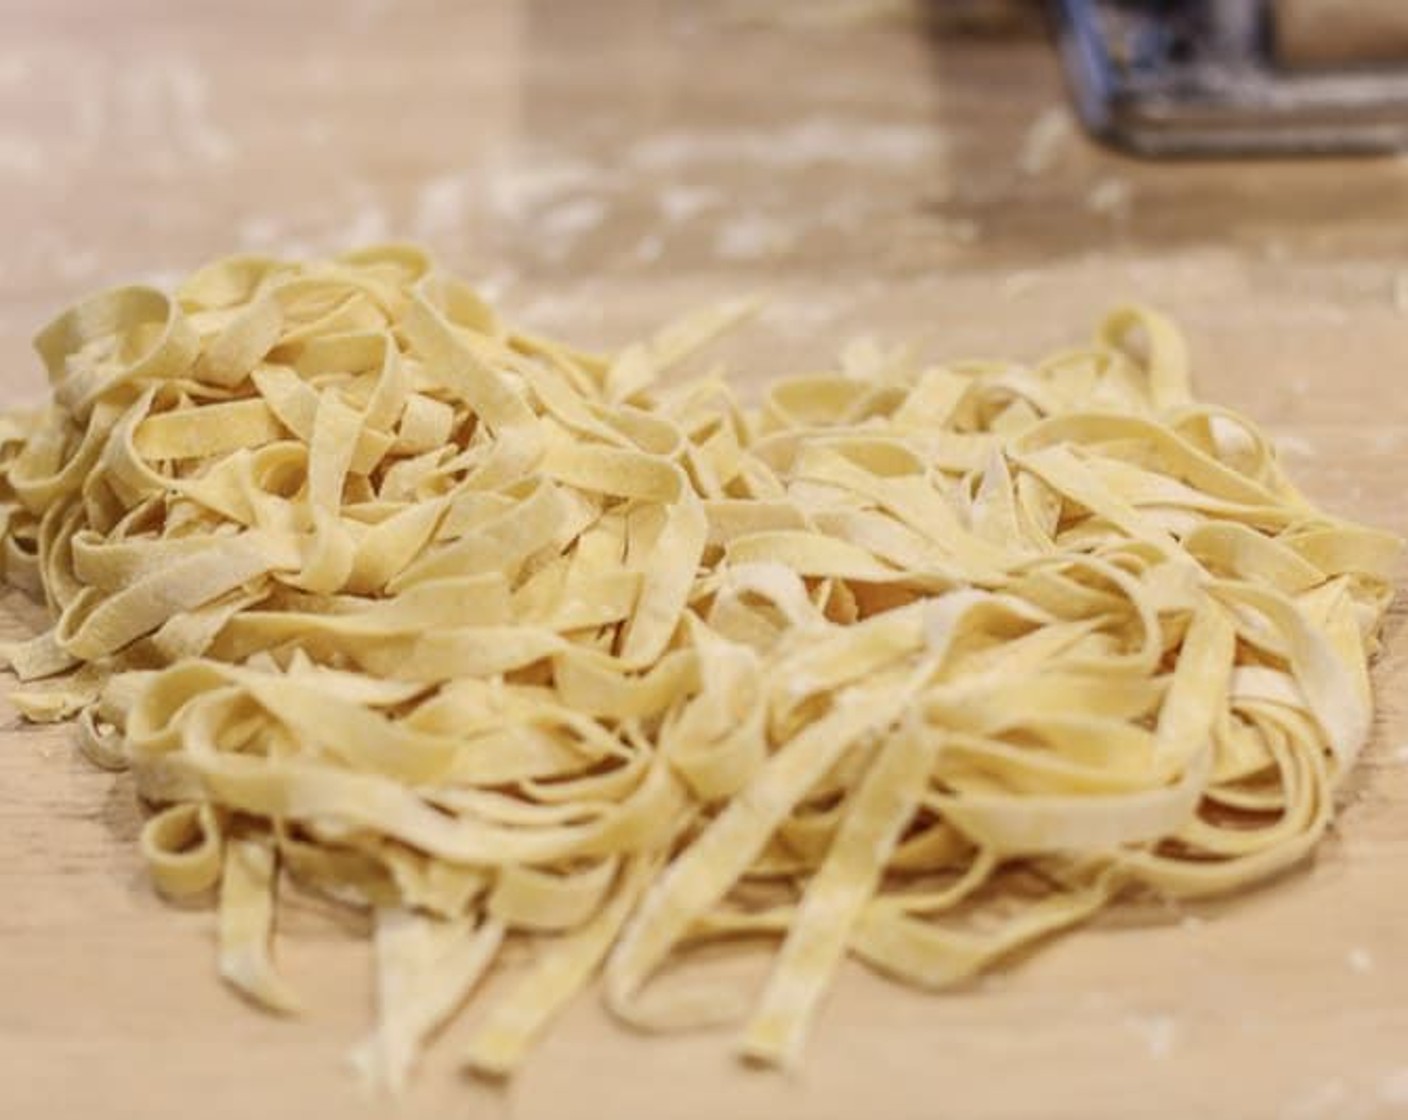 step 7 If cooking right away, boil a pot of salted water and drop the pasta in. Fresh pasta will cook much faster than dry pasta, 2-4 minutes depending on thickness. Serve with your favorite sauce.